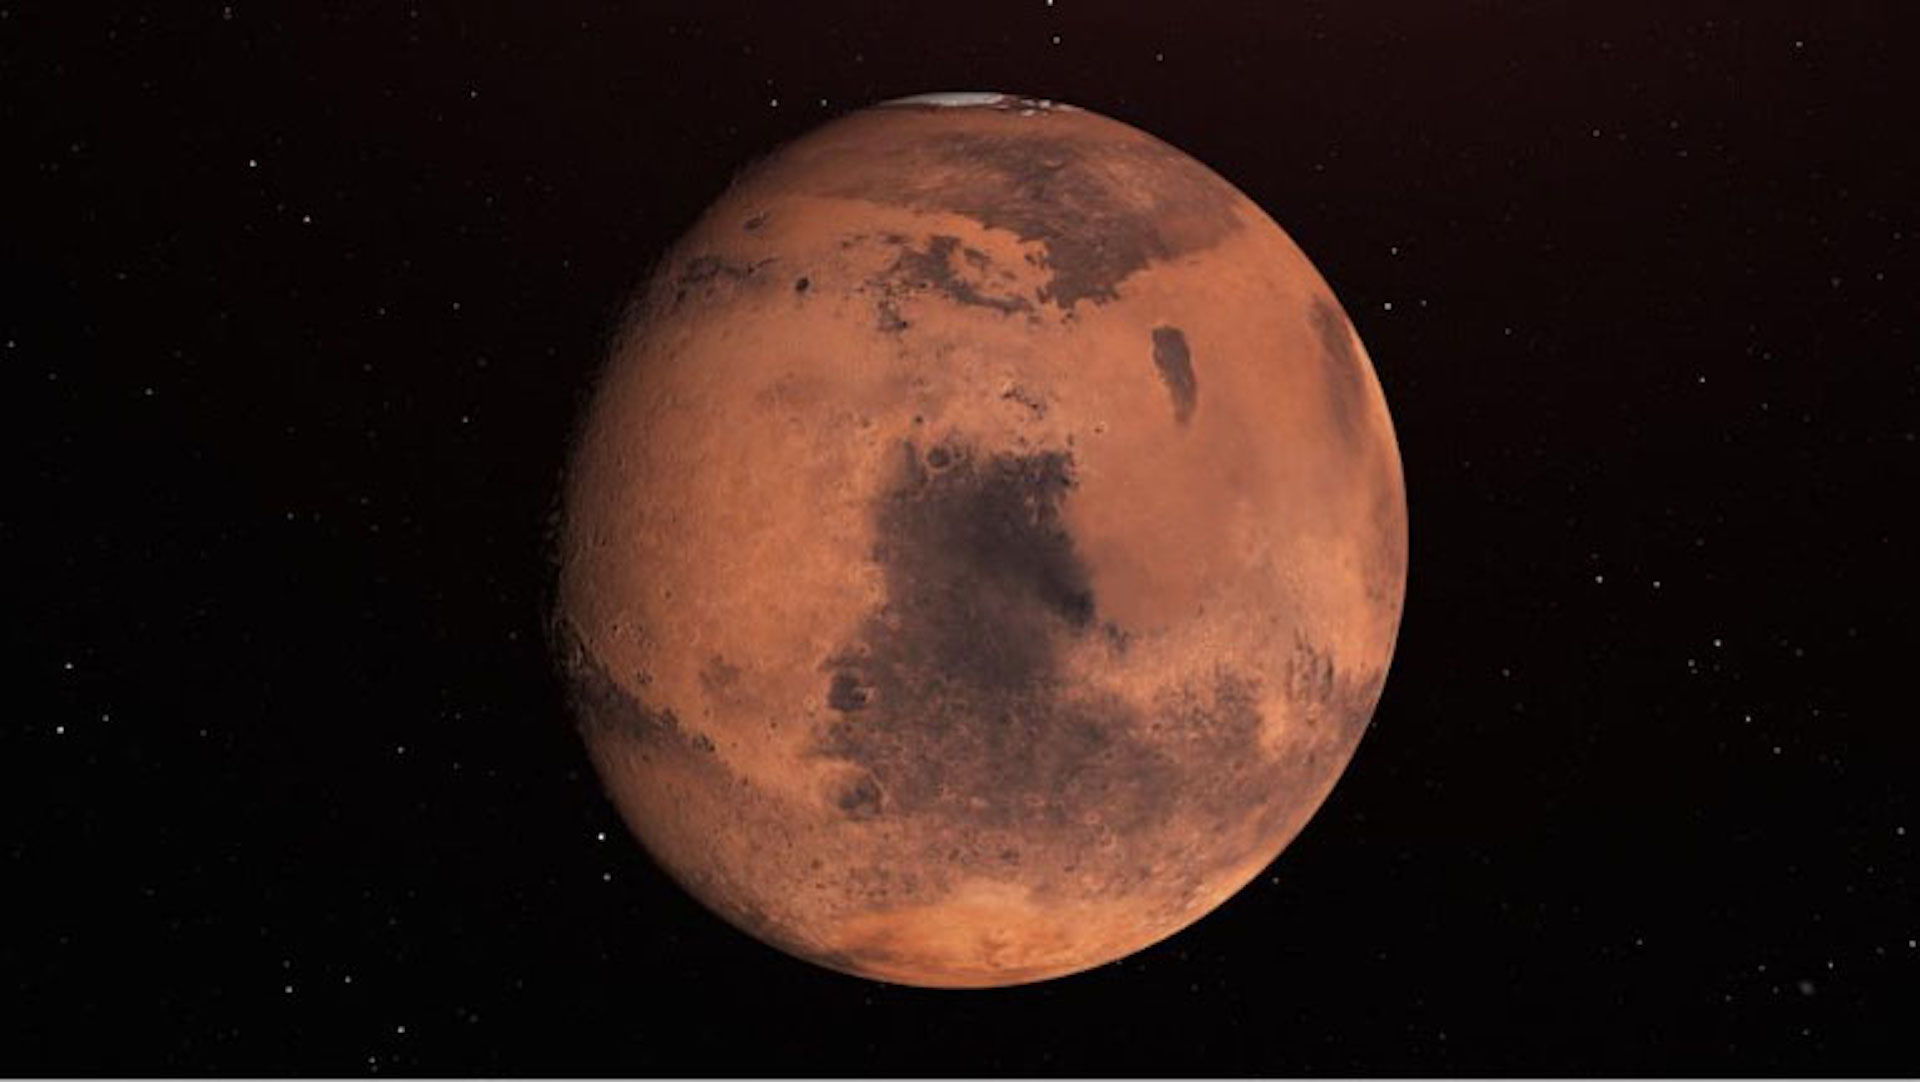 Three spacecraft are set for launch from Earth toward Mars this month.